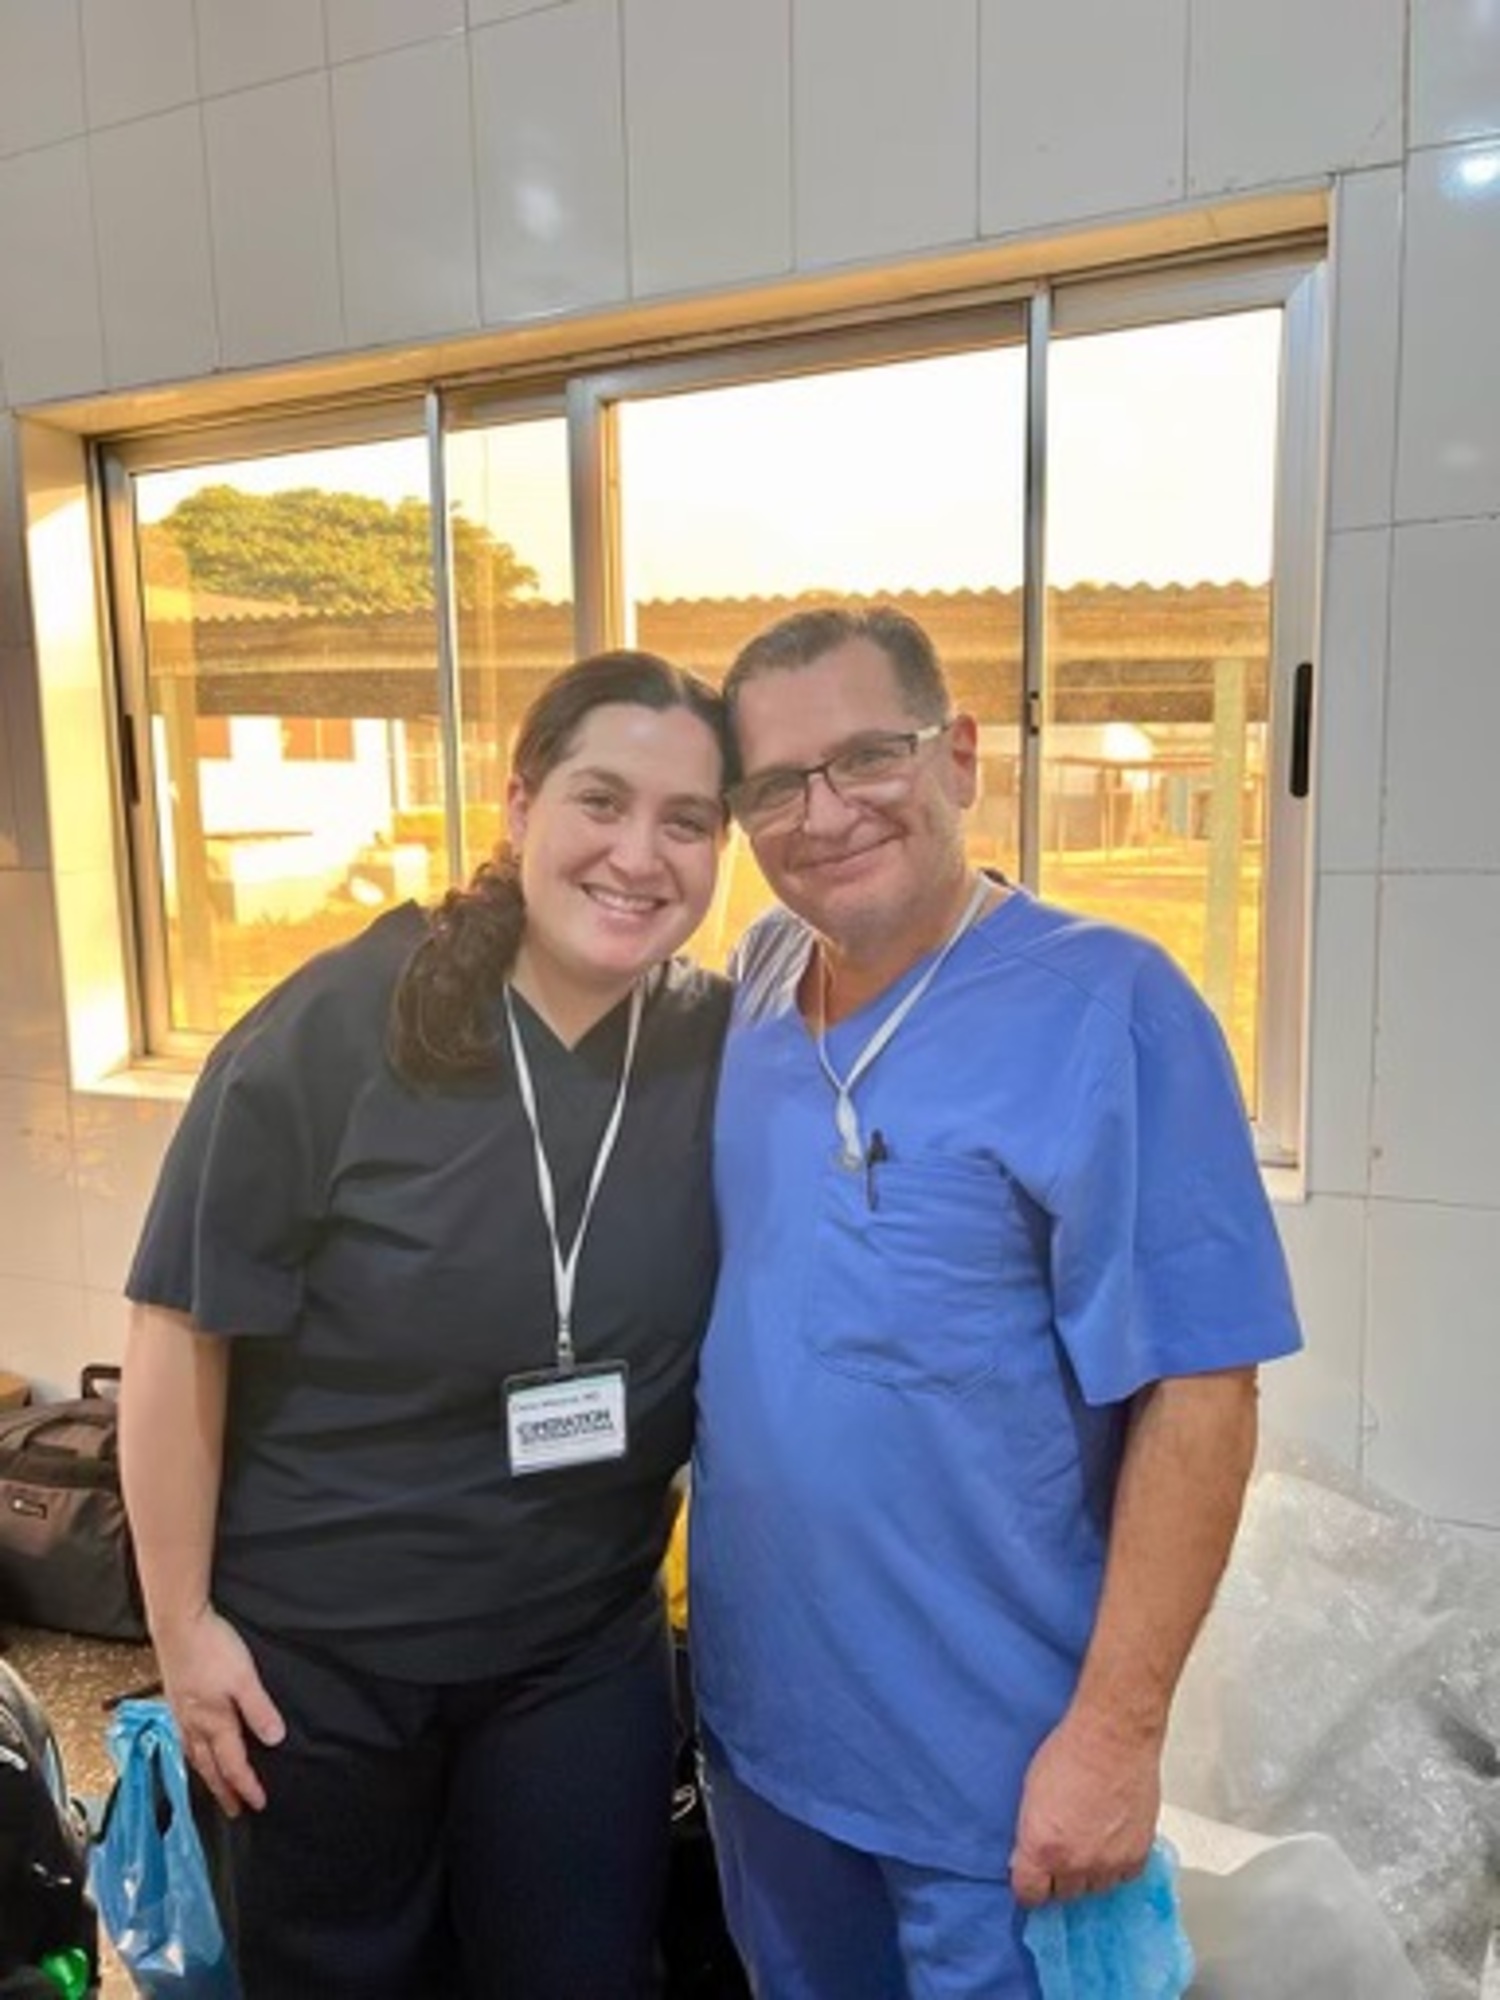 Dr. Vito Alamia of Hamptons Gynecology and Obstetrics with his daughter, Dr. Dana Alamia Masand, who is in her first year of residency at Stony Brook University Hospital. They traveled together to Ghana earlier this month with a team of doctors from the area to provide free women's health care services to residents there.